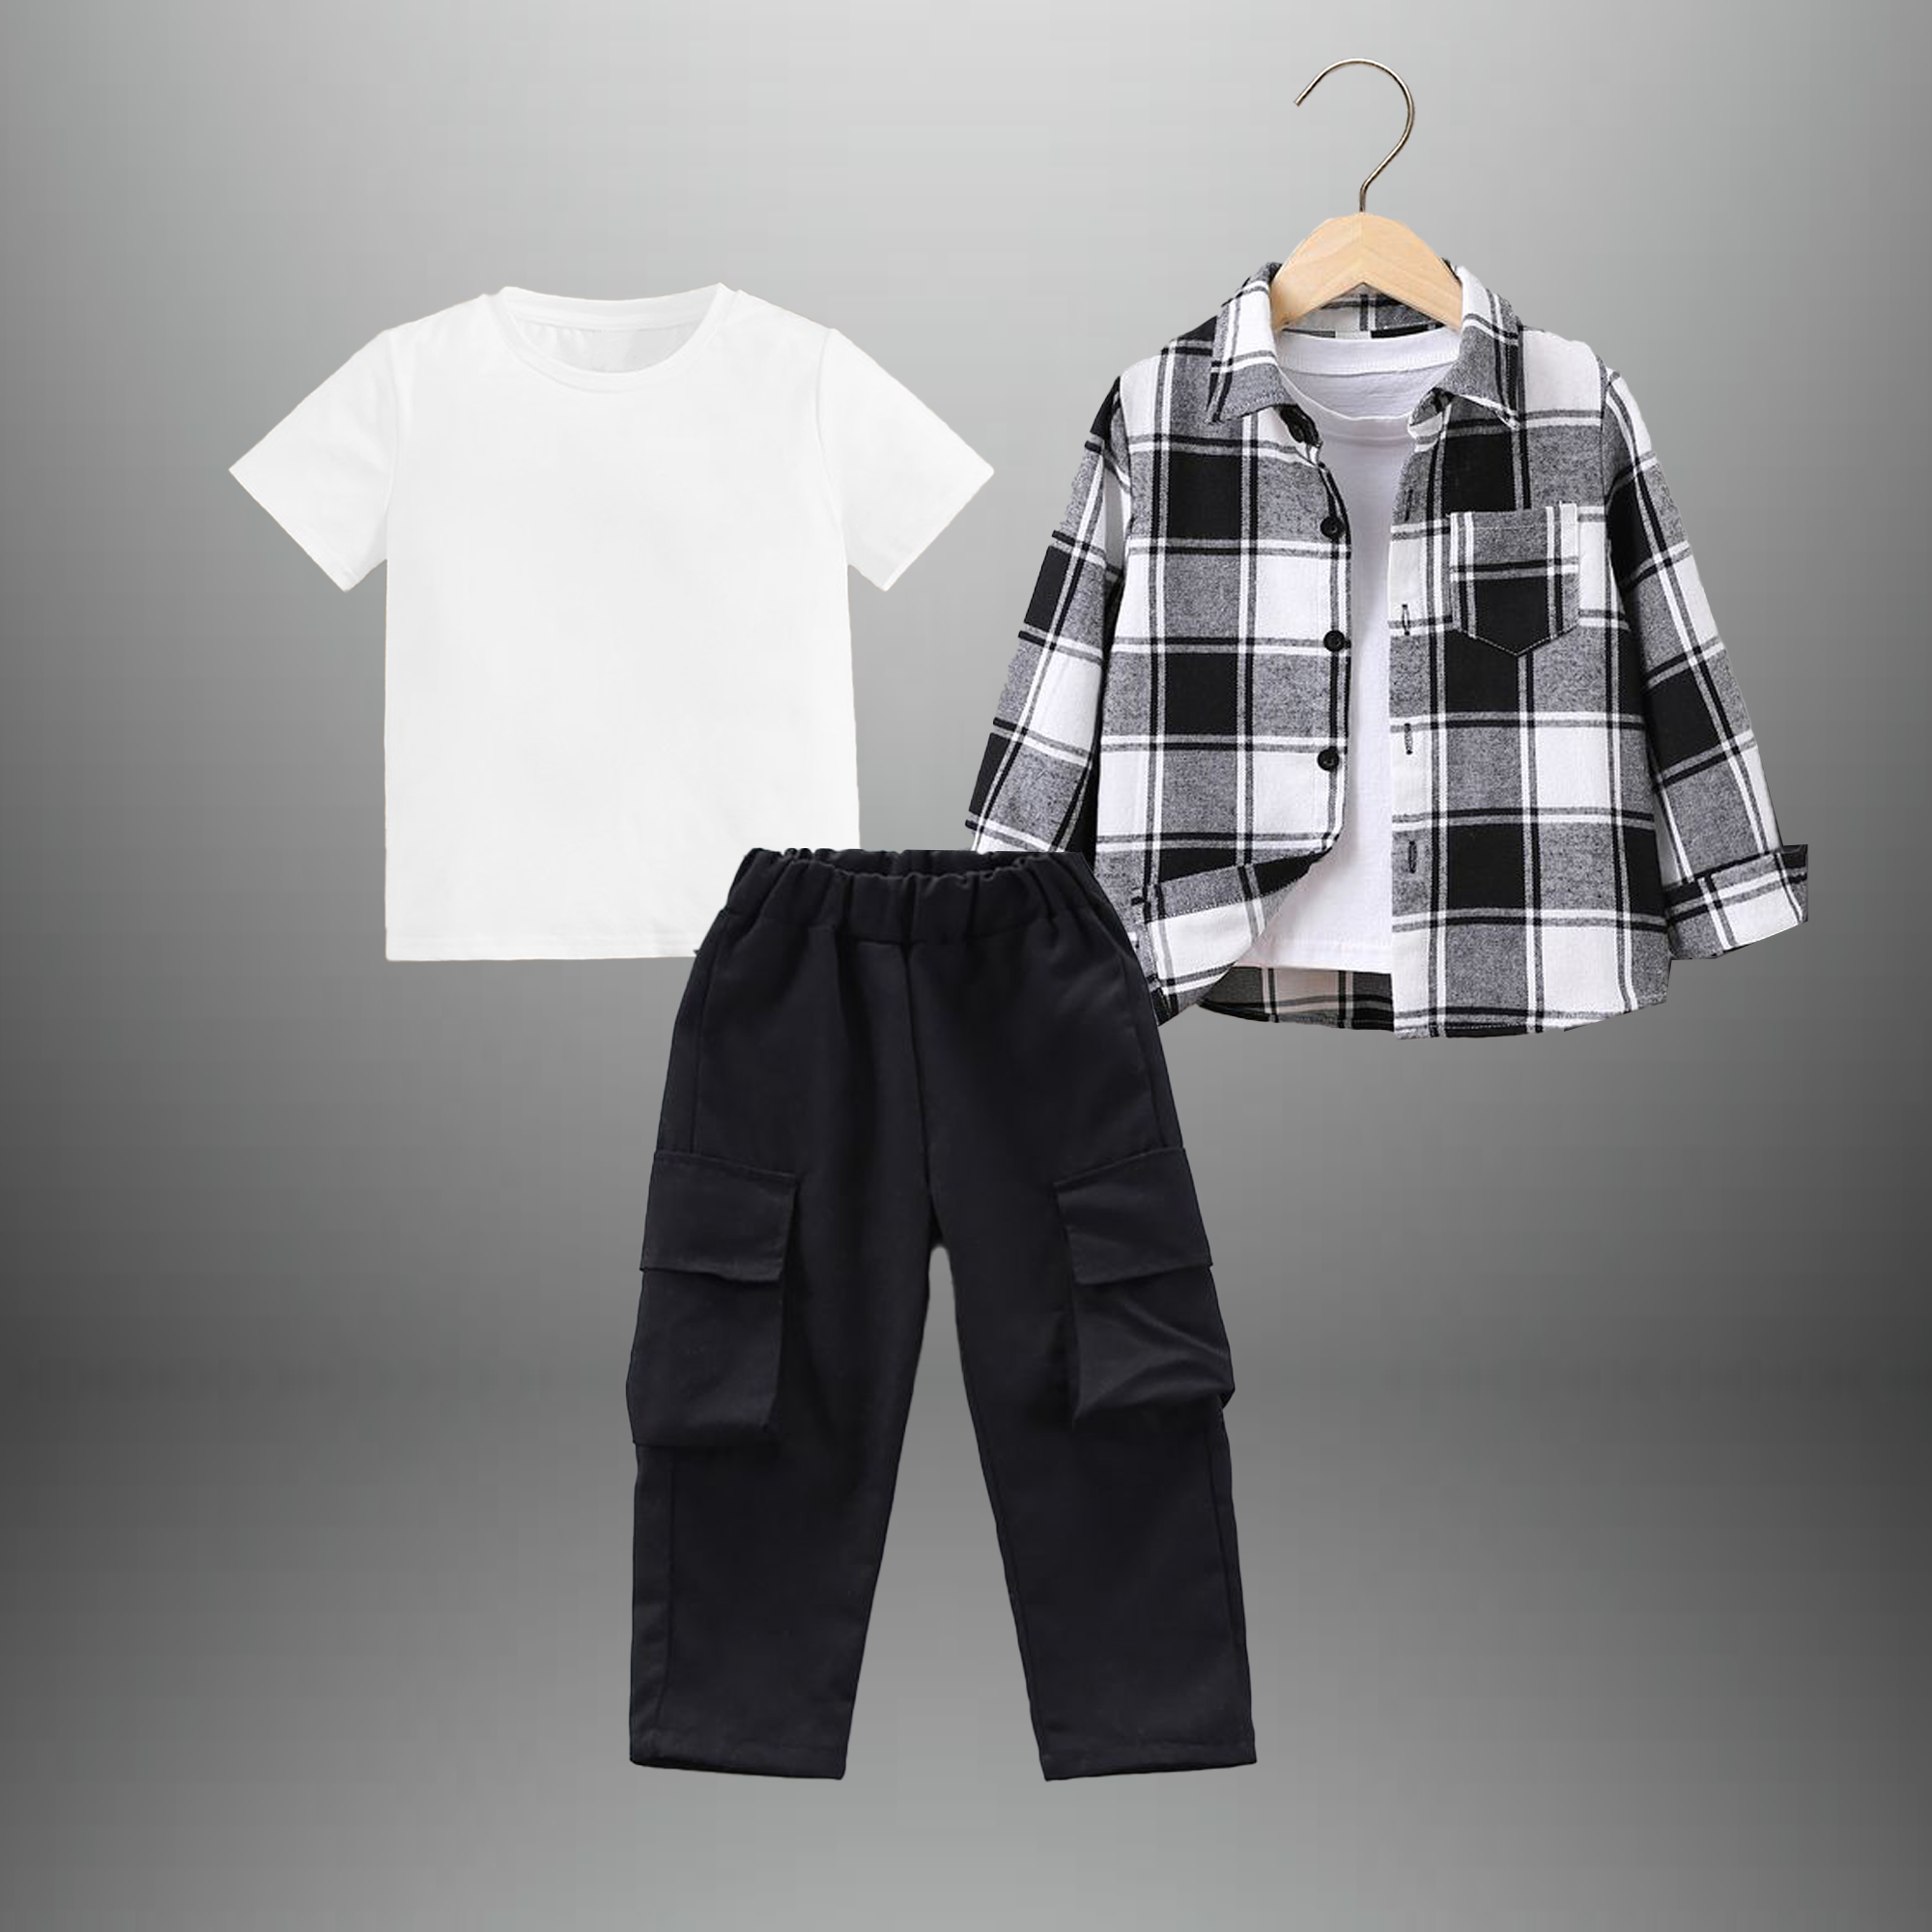 Boy's 3 piece set of Black Cargo pant ,Black and white Checkered shirt and a white T-shirt-RKFCW542